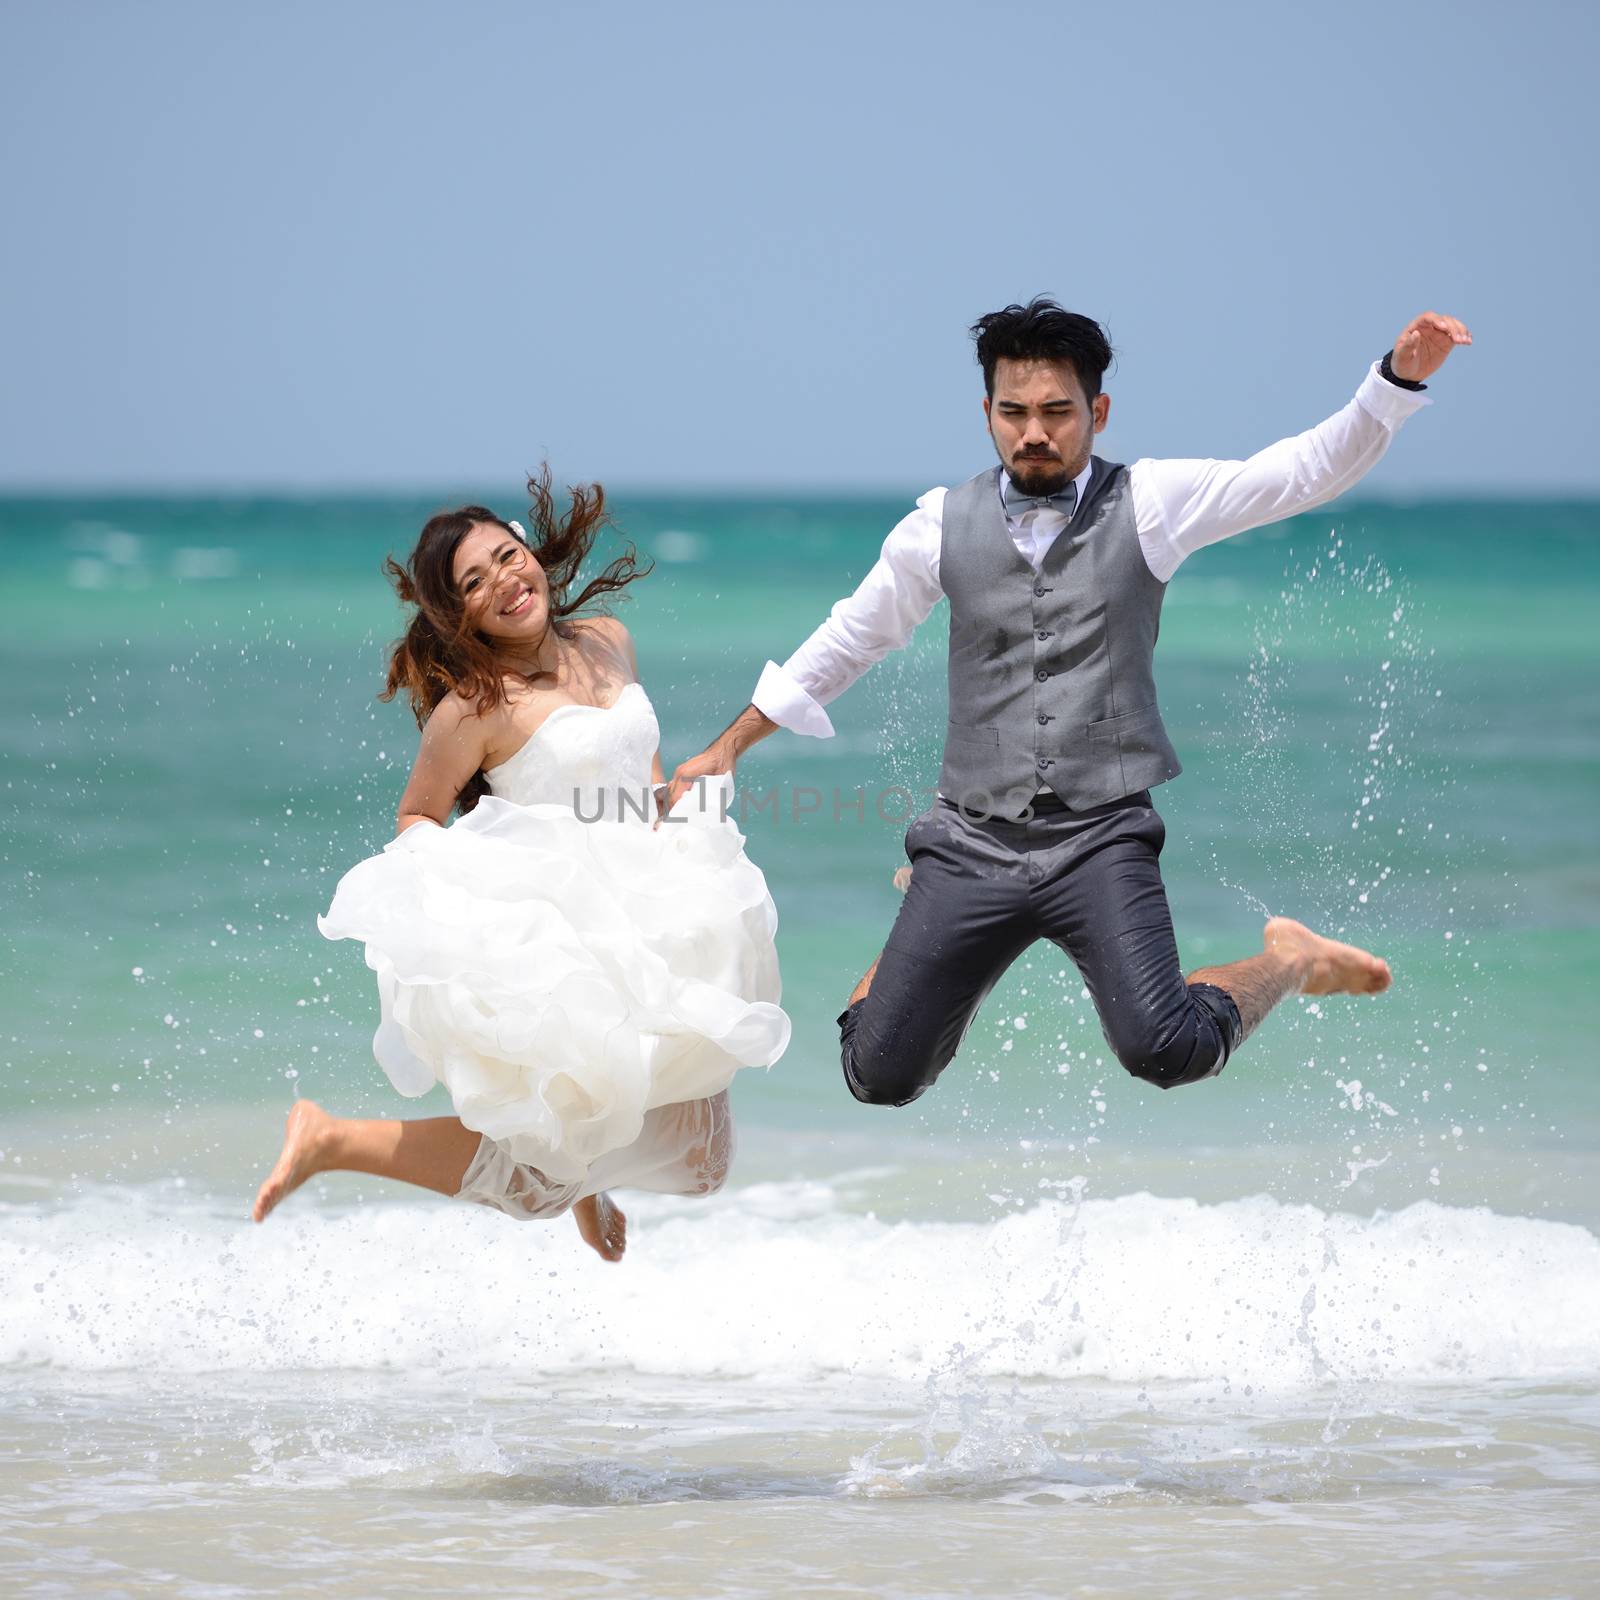 happy just married young couple celebrating and have fun at beau by numskyman